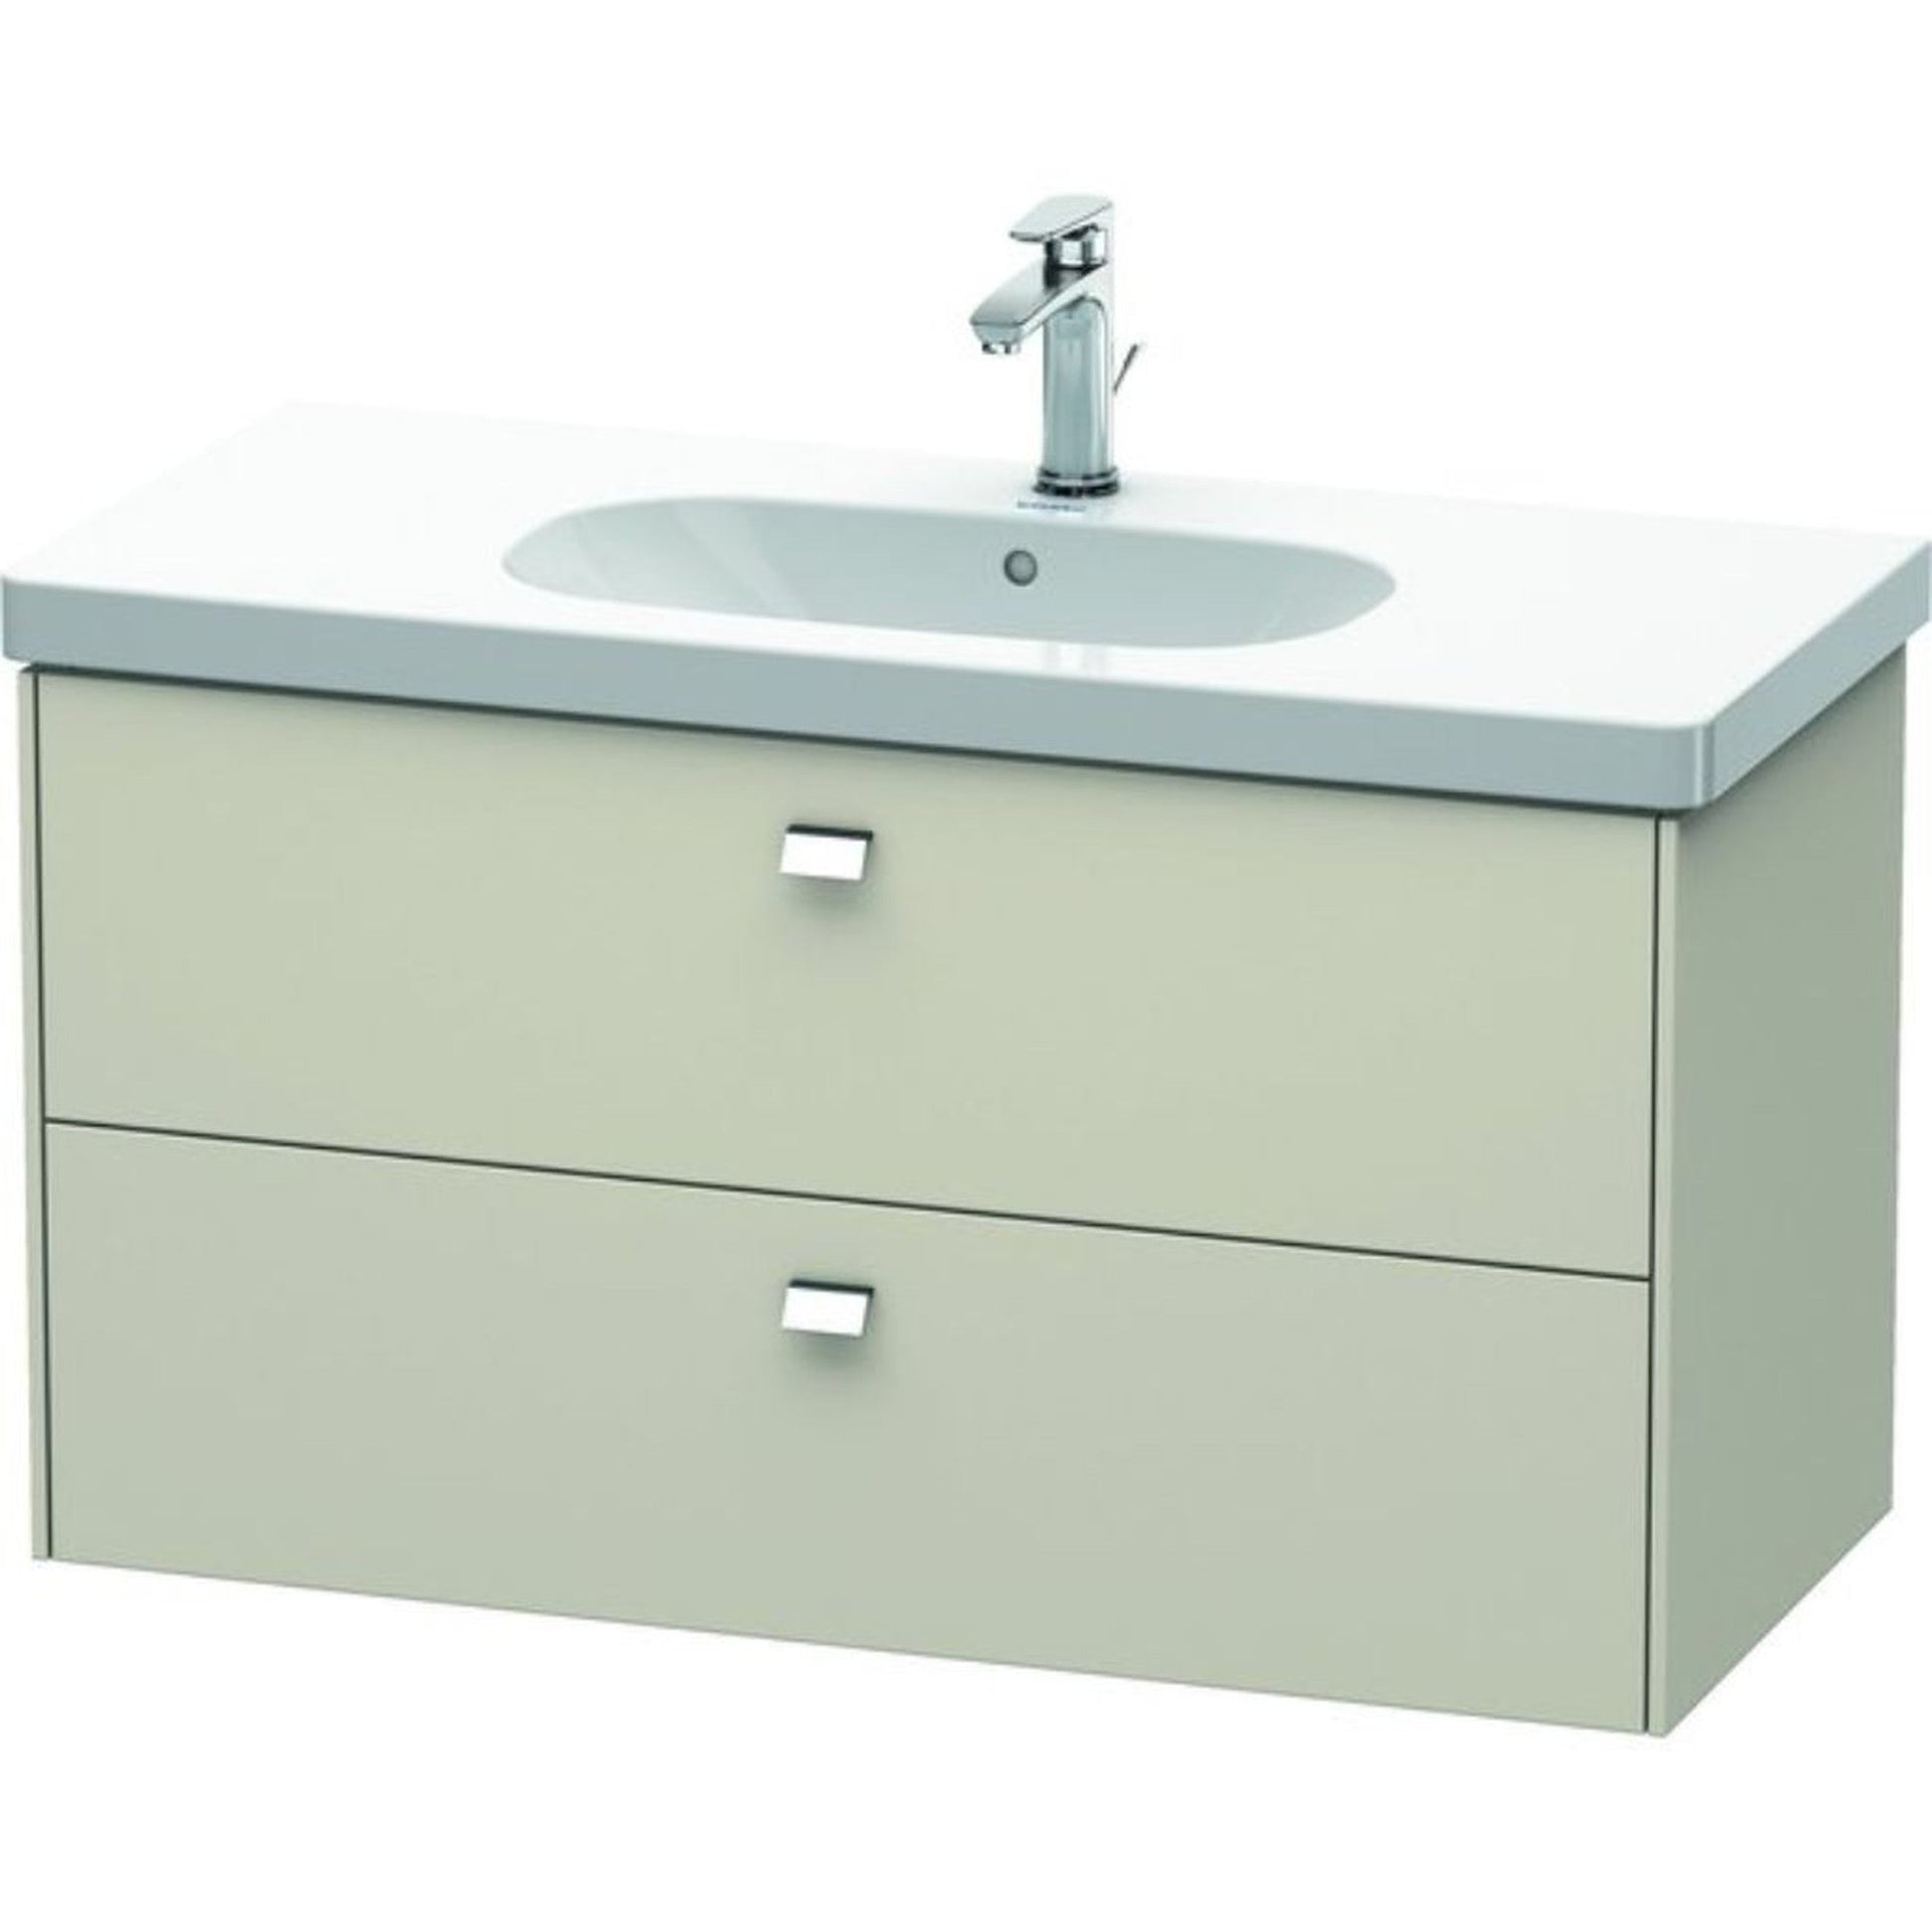 Duravit Brioso BR41470 40" x 22" x 18" Two Drawer Wall-Mount Vanity Unit in Taupe and Chrome Handle